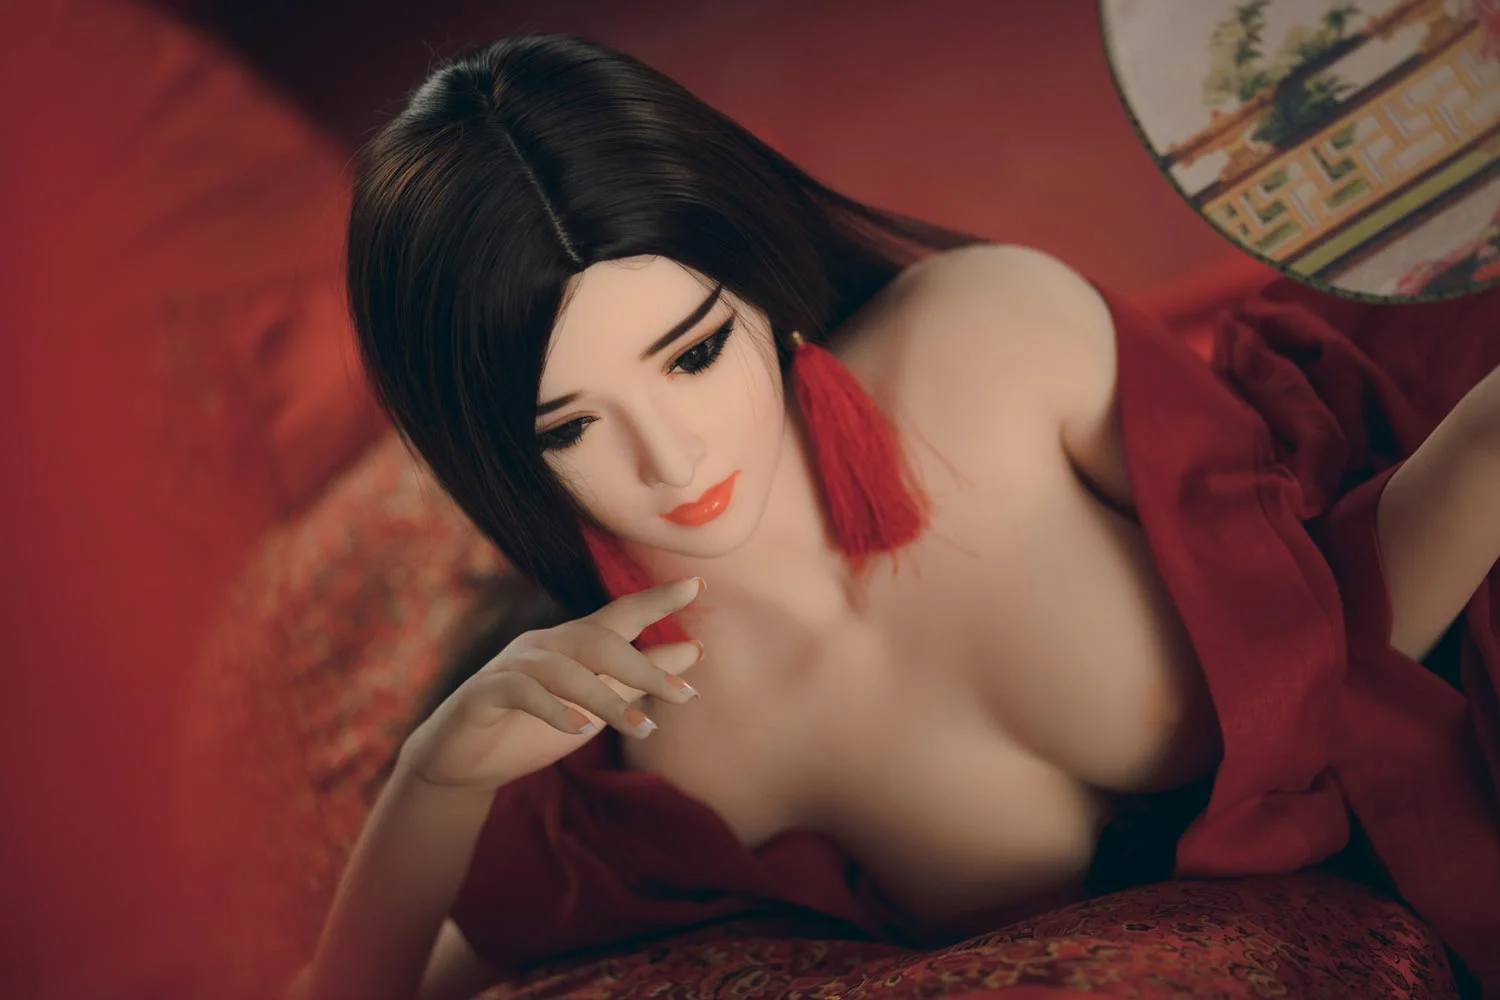 Sex doll pointing finger to herself